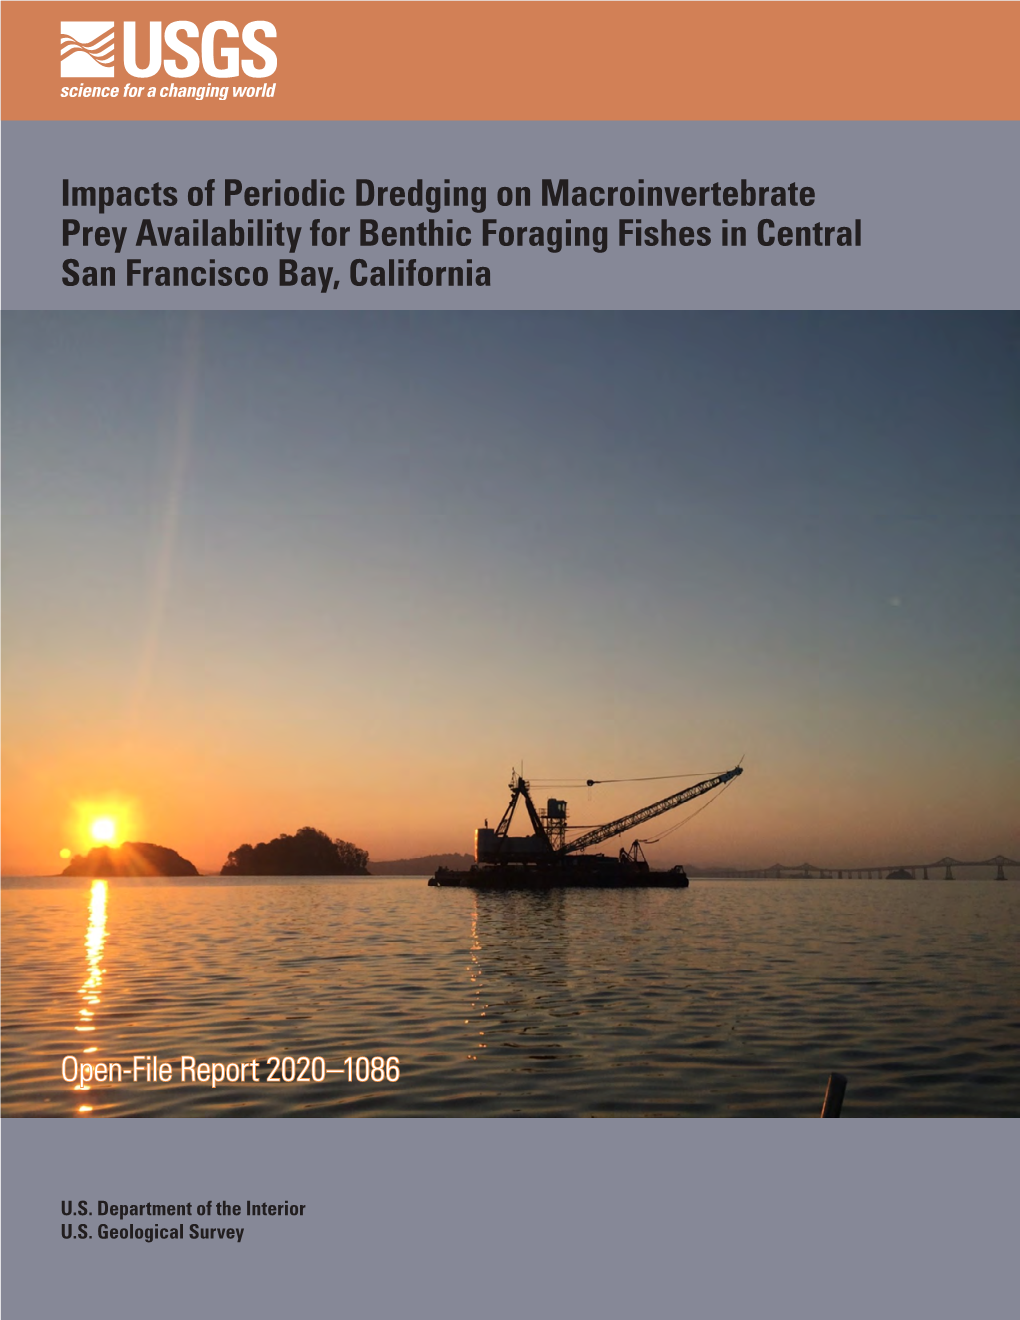 Impacts of Periodic Dredging on Macroinvertebrate Prey Availability for Benthic Foraging Fishes in Central San Francisco Bay, California